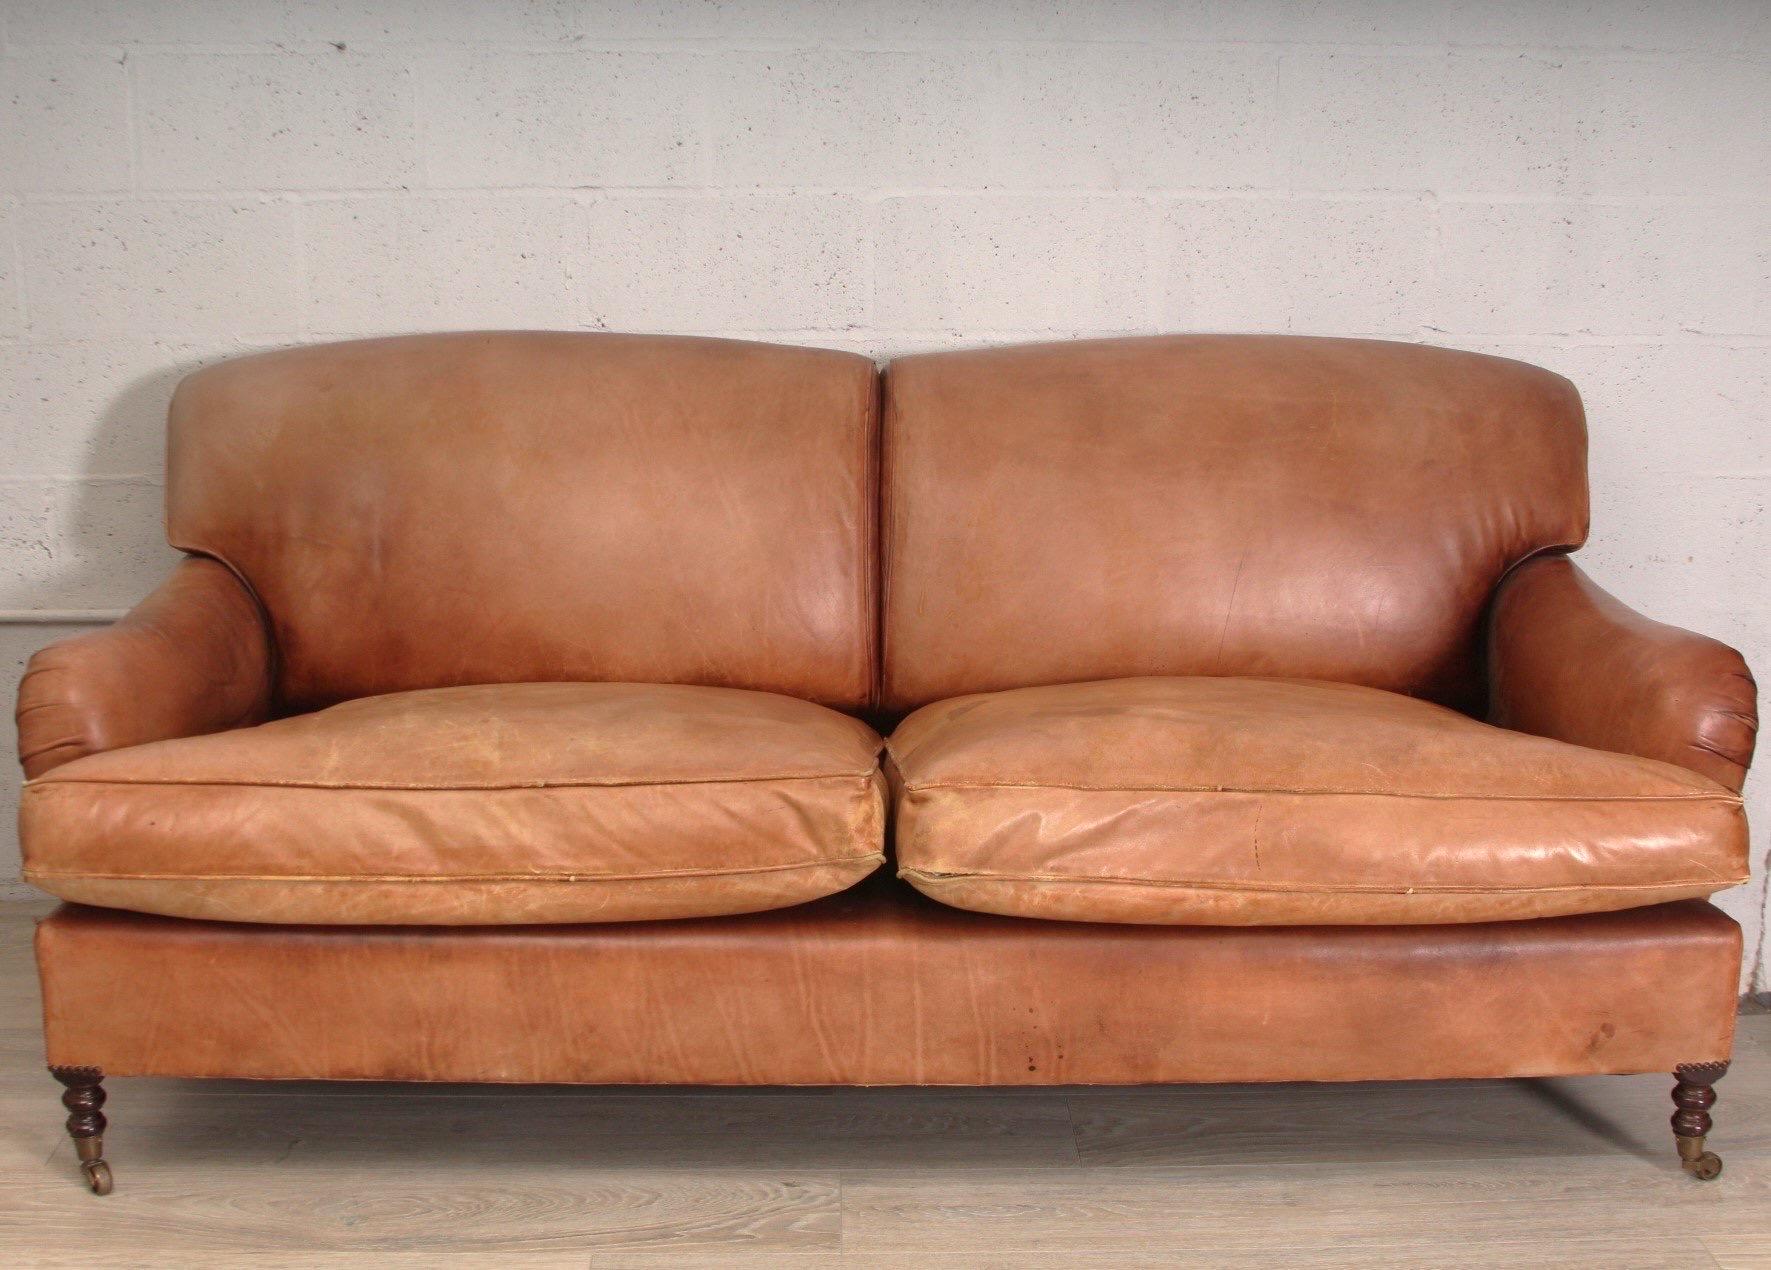 George Smith Scroll Arm Sofa in Cognac brown leather.

Features sumptuous leather upholstery with scroll arms and deep button tufting.  Complemented by a robust, hand-built frame for enduring stability and support. 

Dimensions: 
78”L x 38”W x